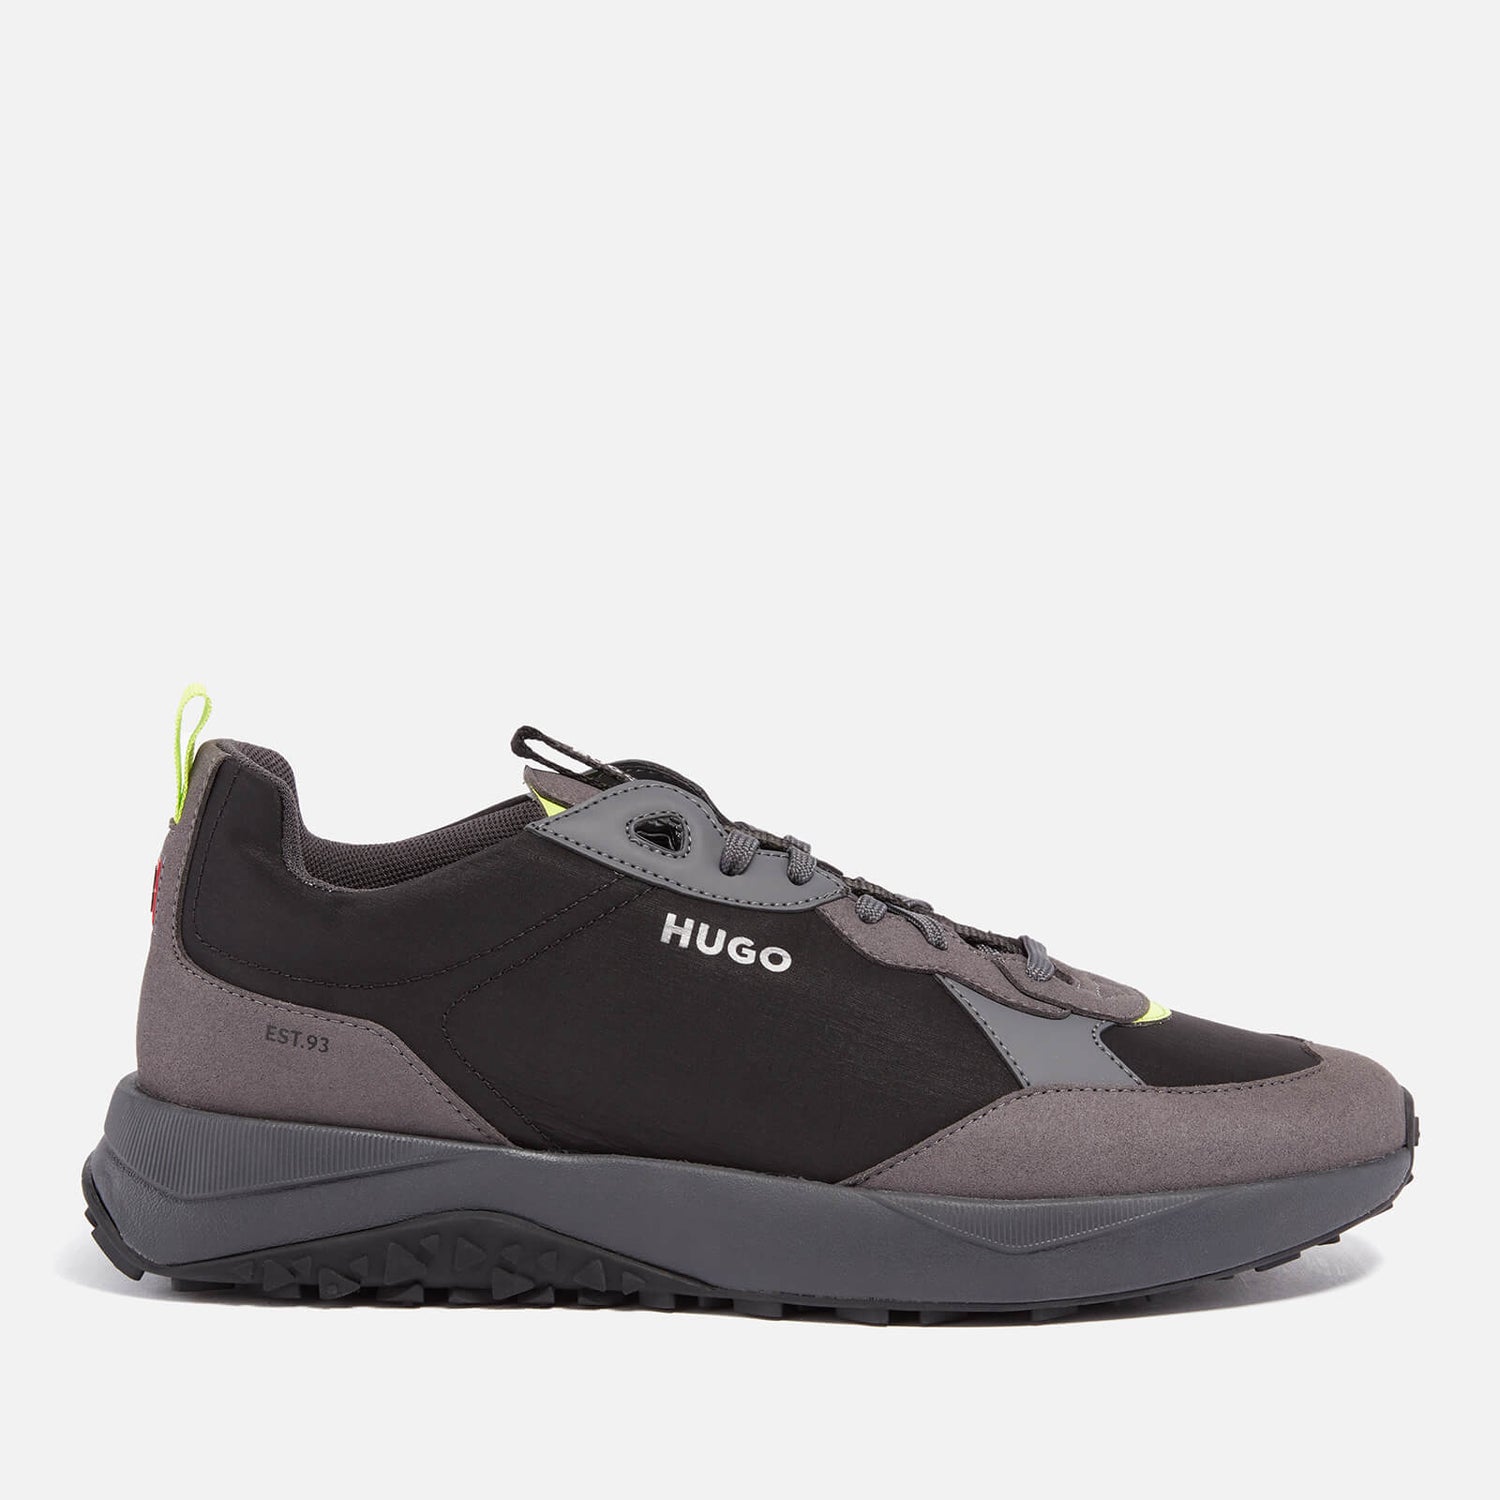 HUGO Men's Kane Runn Mfny N Shell and Faux Suede Trainers - UK 7